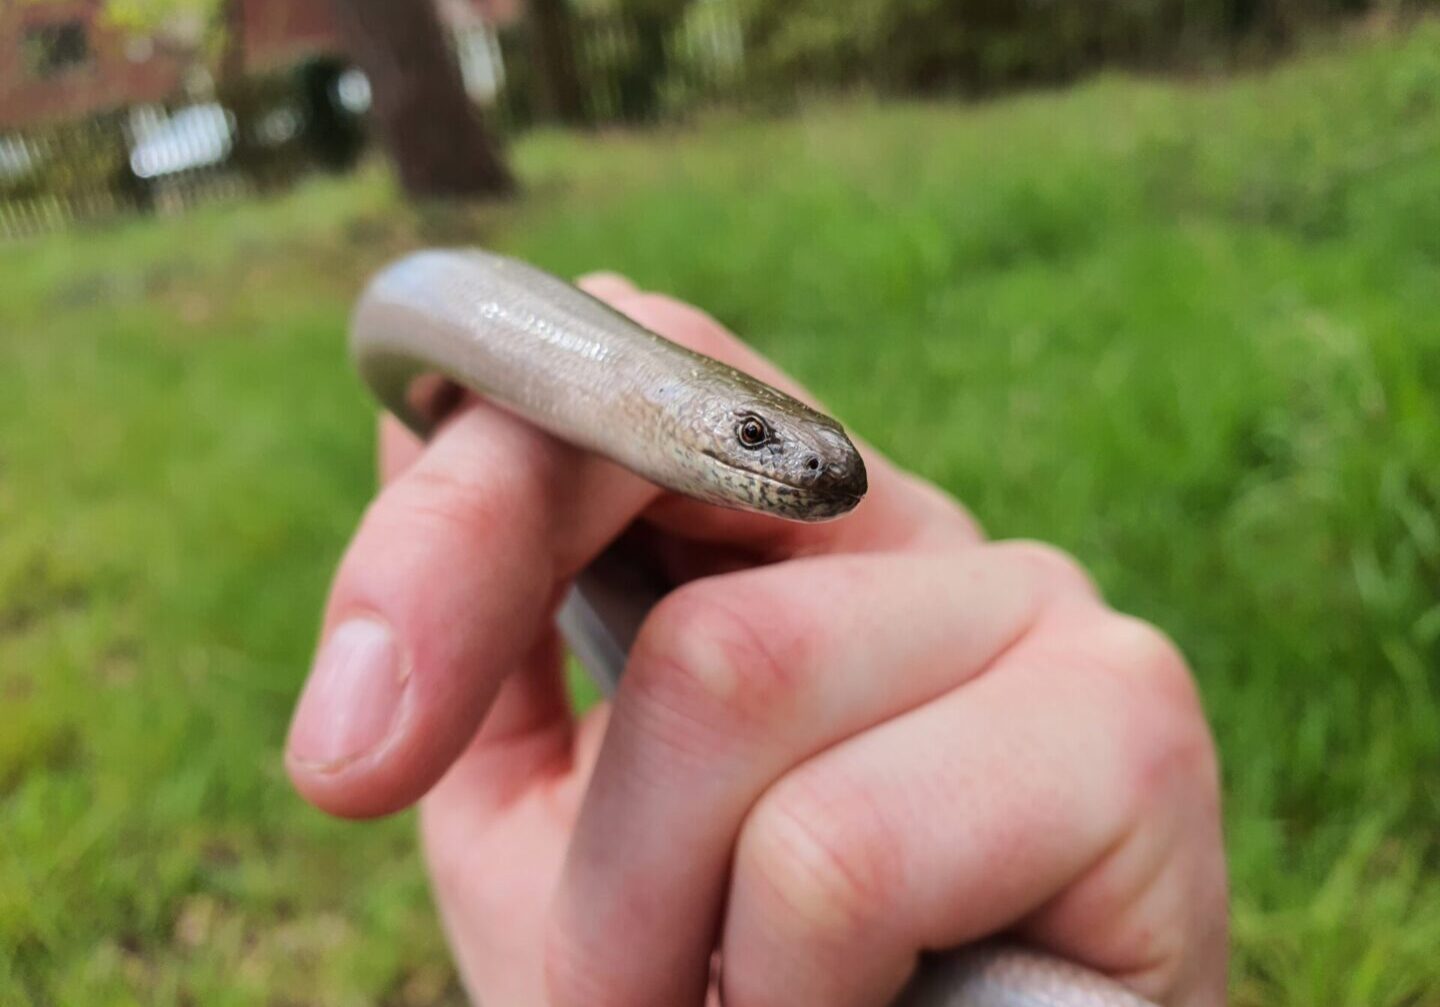 holding in hand a gray colored snake